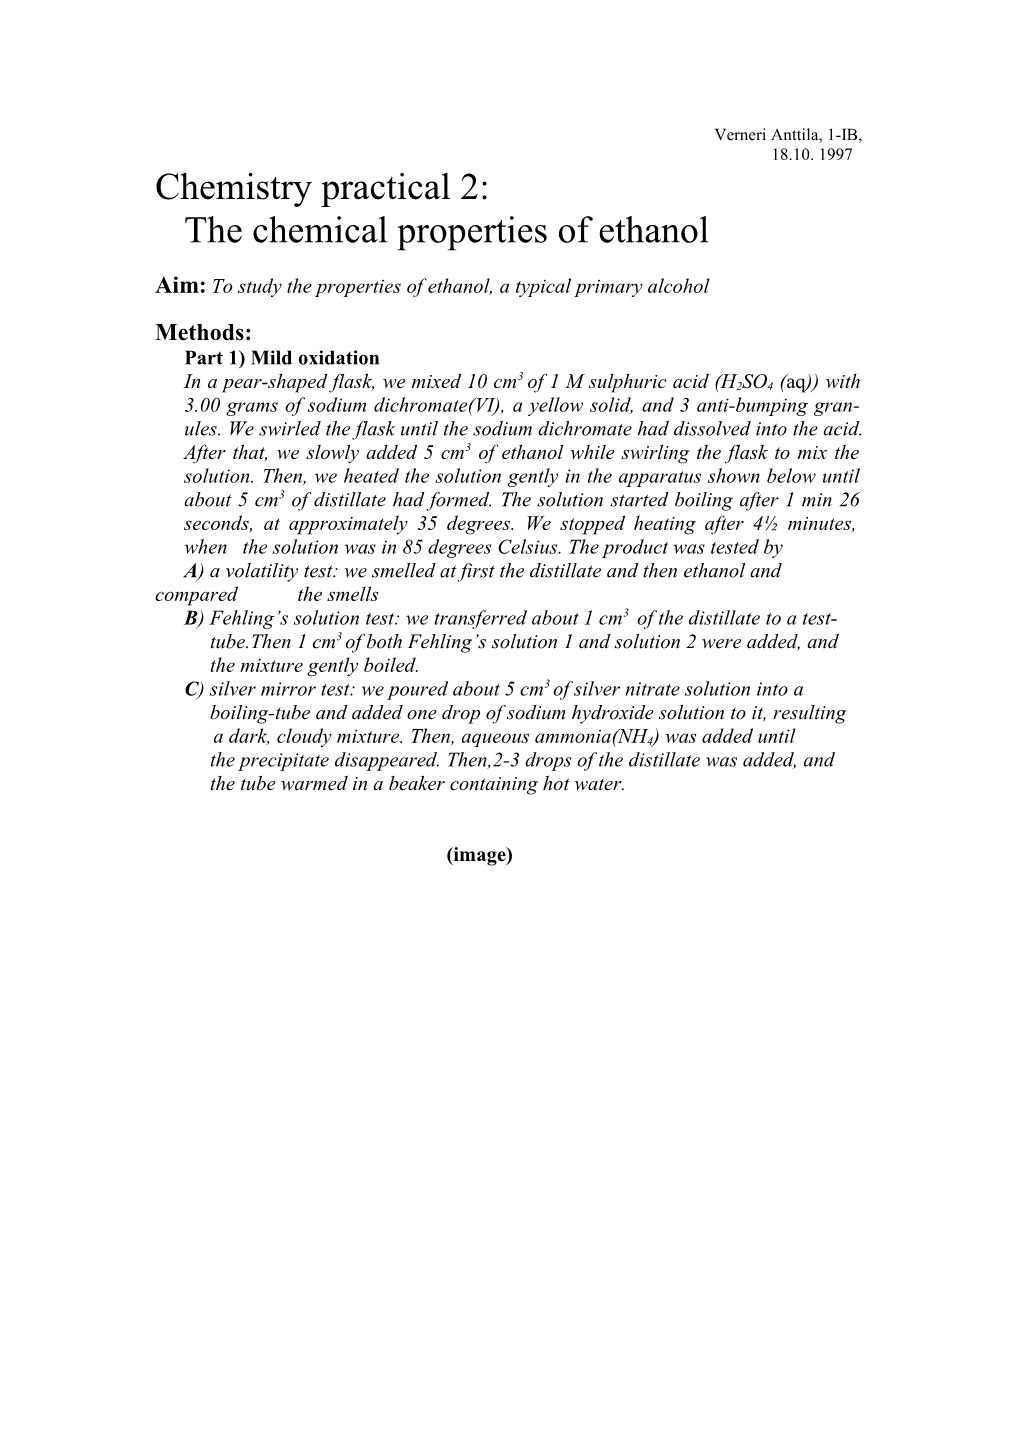 Chemistry Practical 2: Chemical Properties of Ethanol